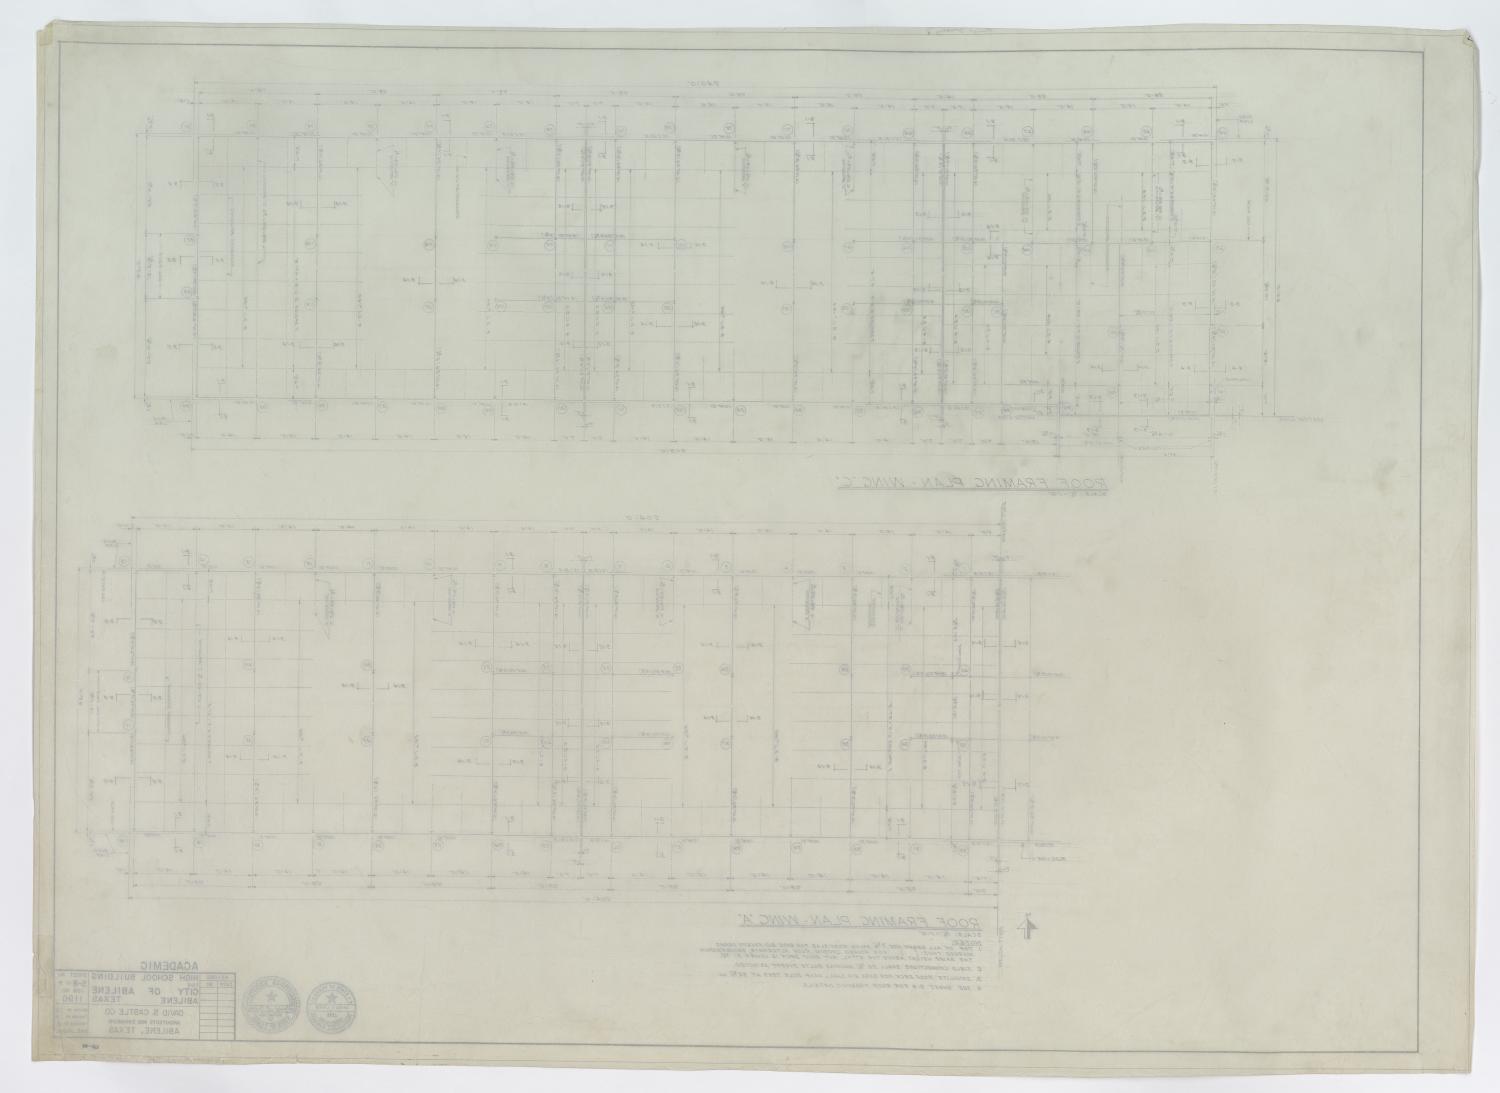 High School Building Abilene, Texas: Roof Framing Plan Wing 'A' & 'C'
                                                
                                                    [Sequence #]: 2 of 2
                                                